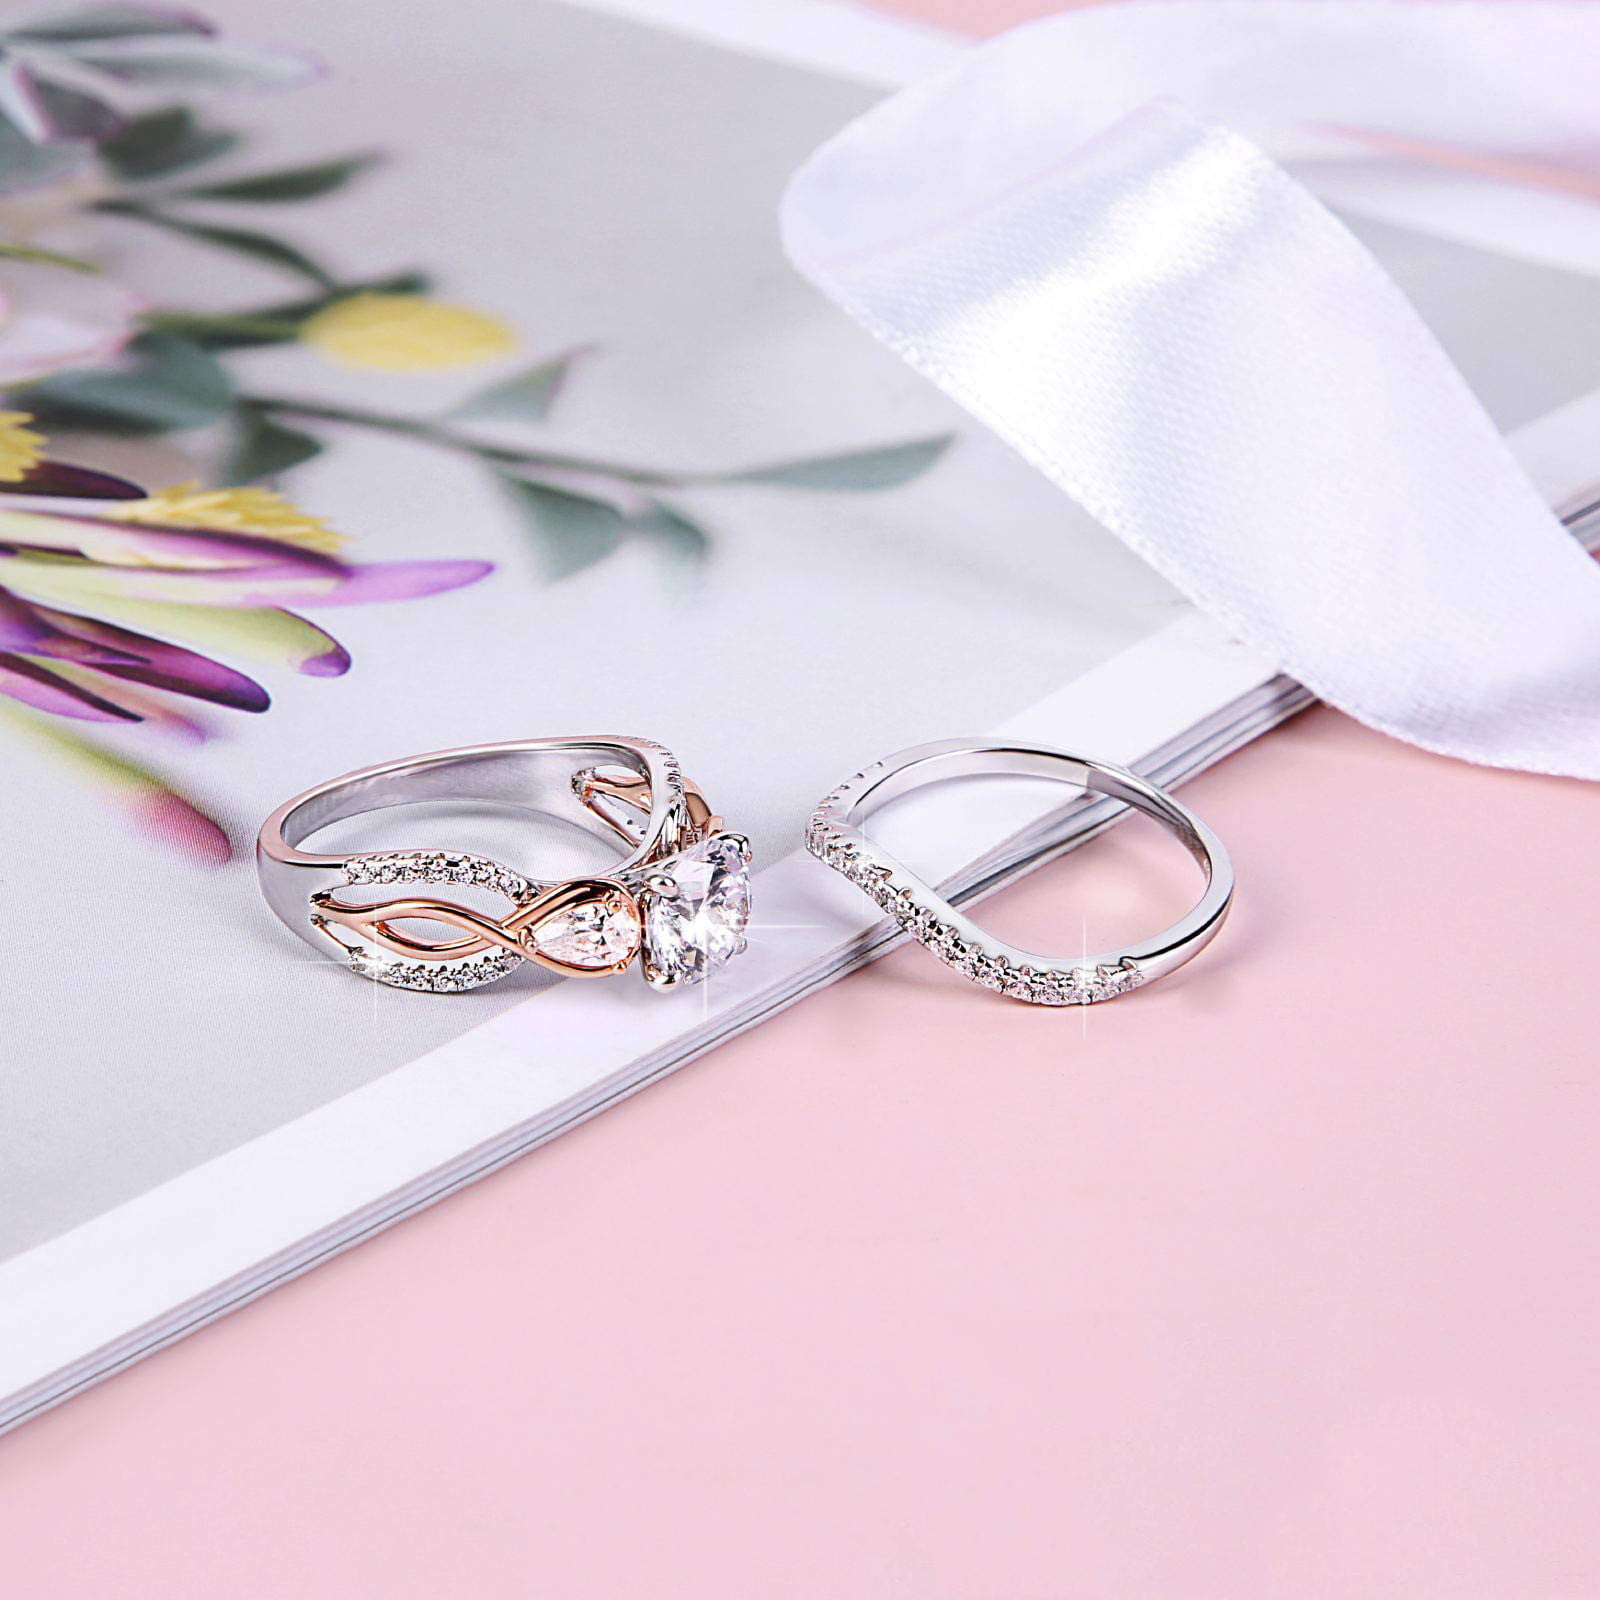 Customised Wedding Rings | Create Your Wedding Band In Malaysia | Love & Co